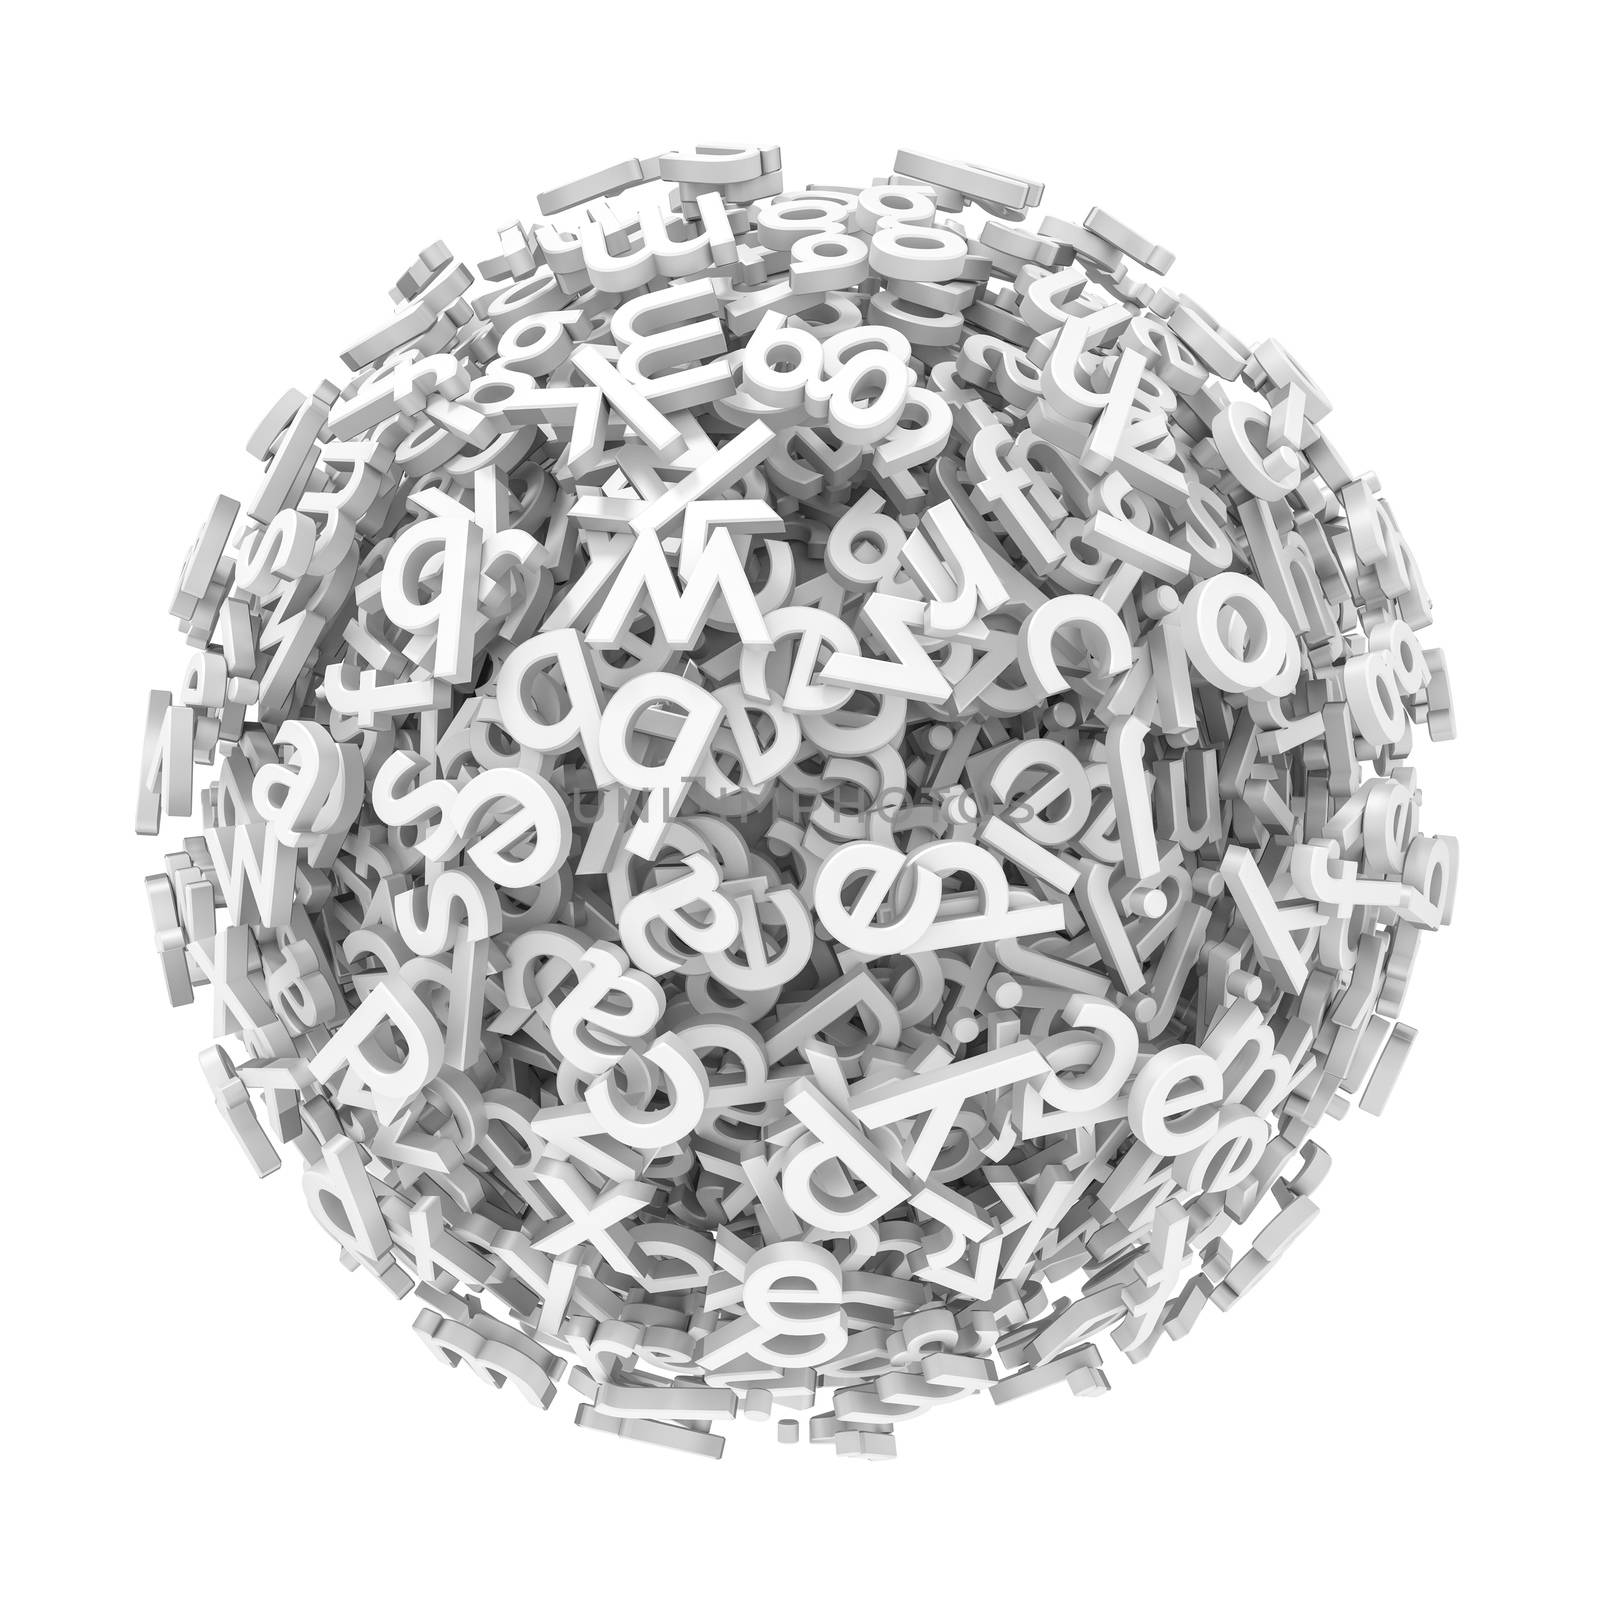 3d rendering of a gray typography sphere